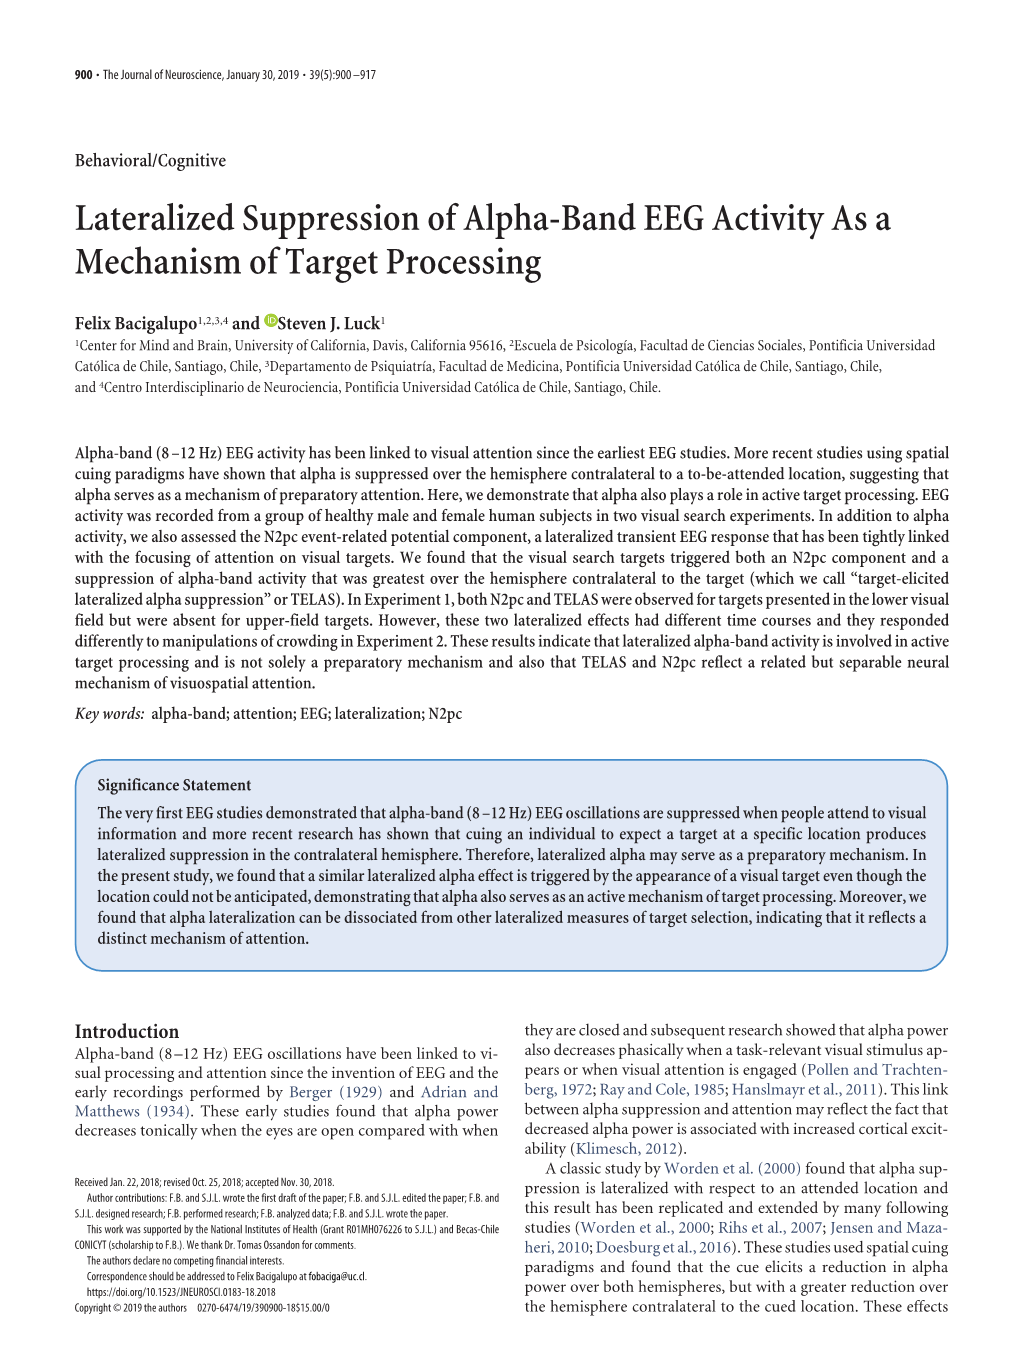 Lateralized Suppression of Alpha-Band EEG Activity As a Mechanism of Target Processing